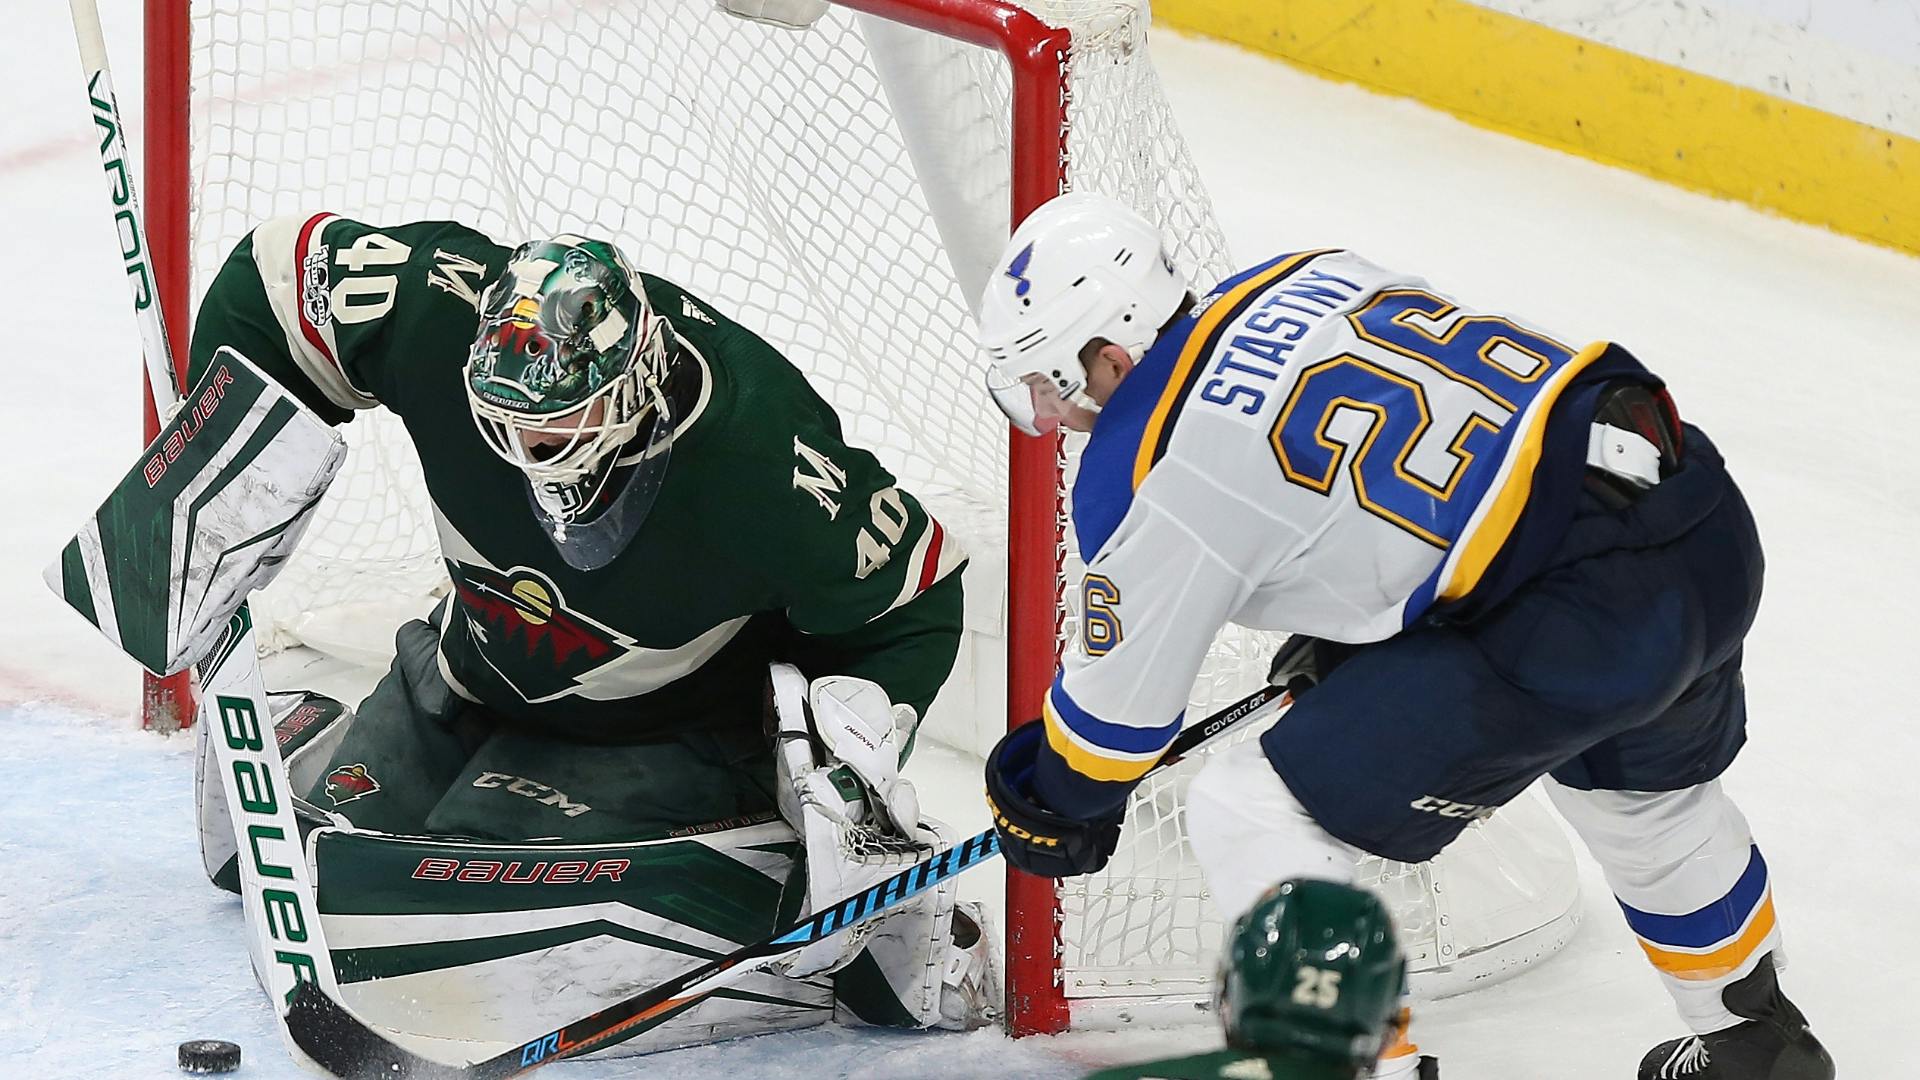 Sarah McLellan recaps the 2-1 overtime win over the Blues in her Wild wrap-up.